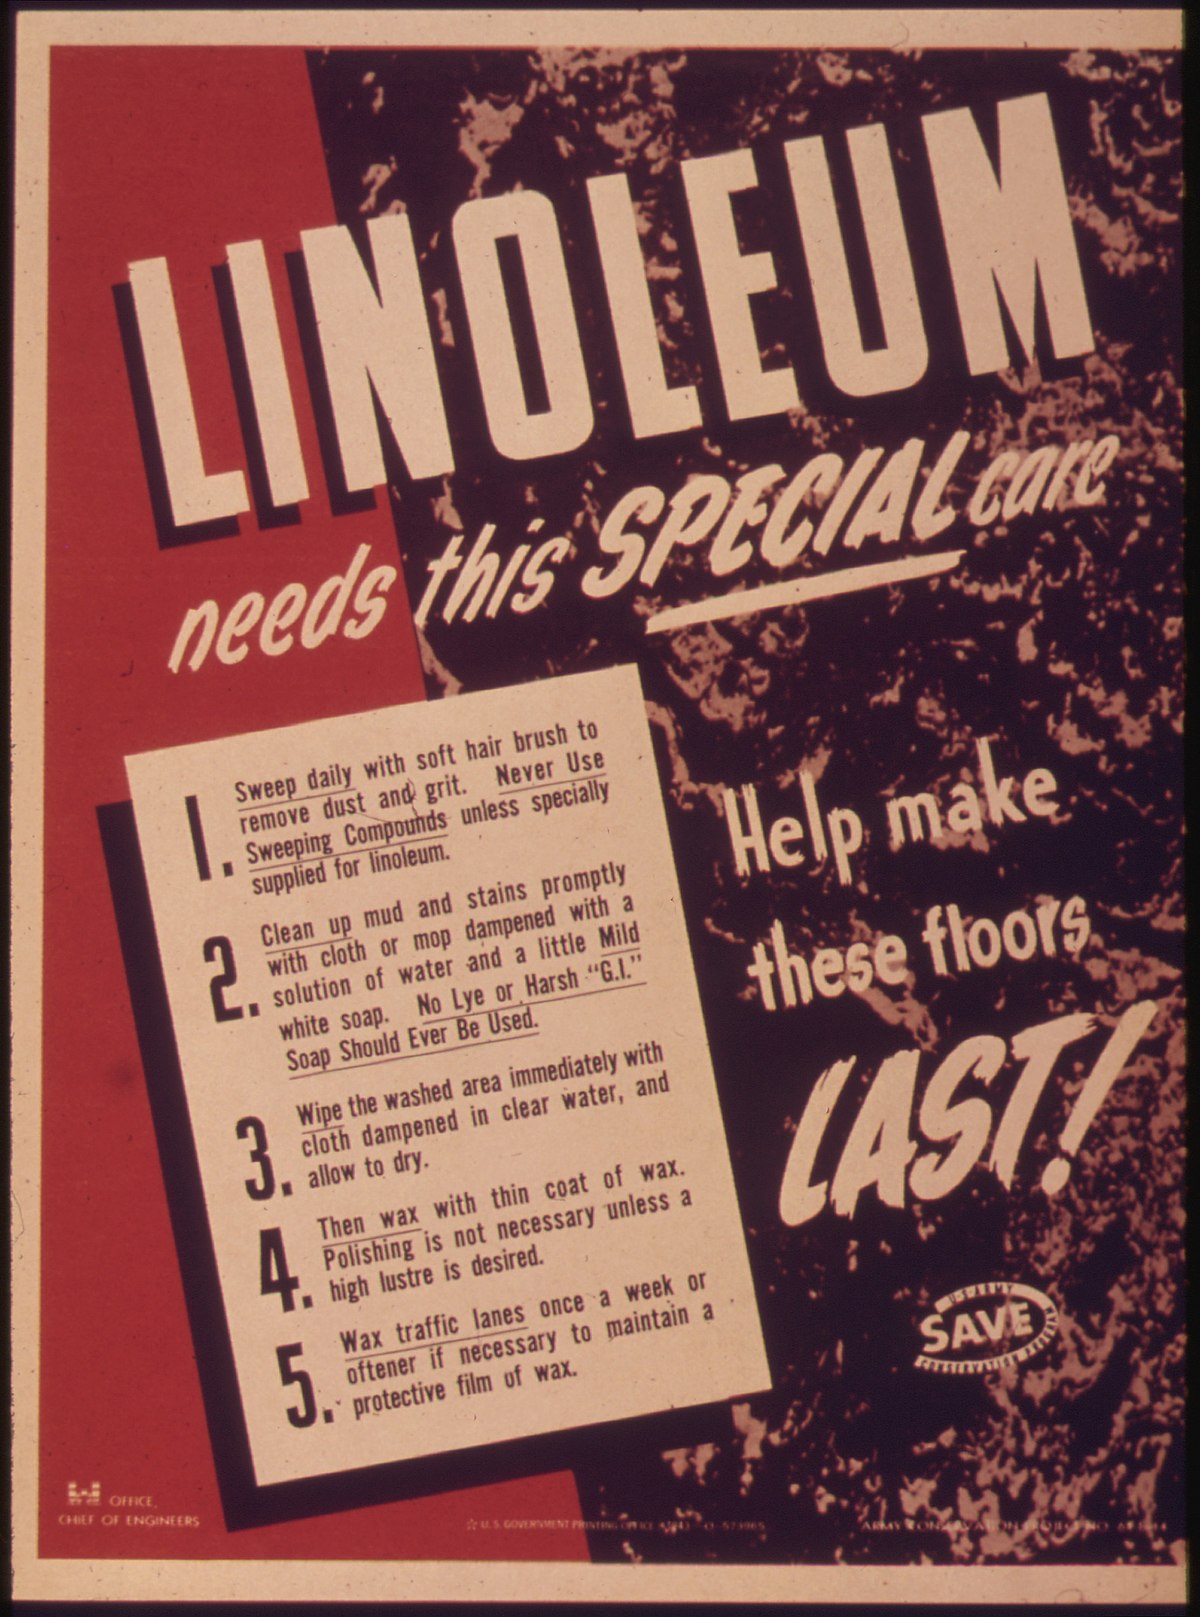 File Linoleum Needs This Special Care Help Make These Floors